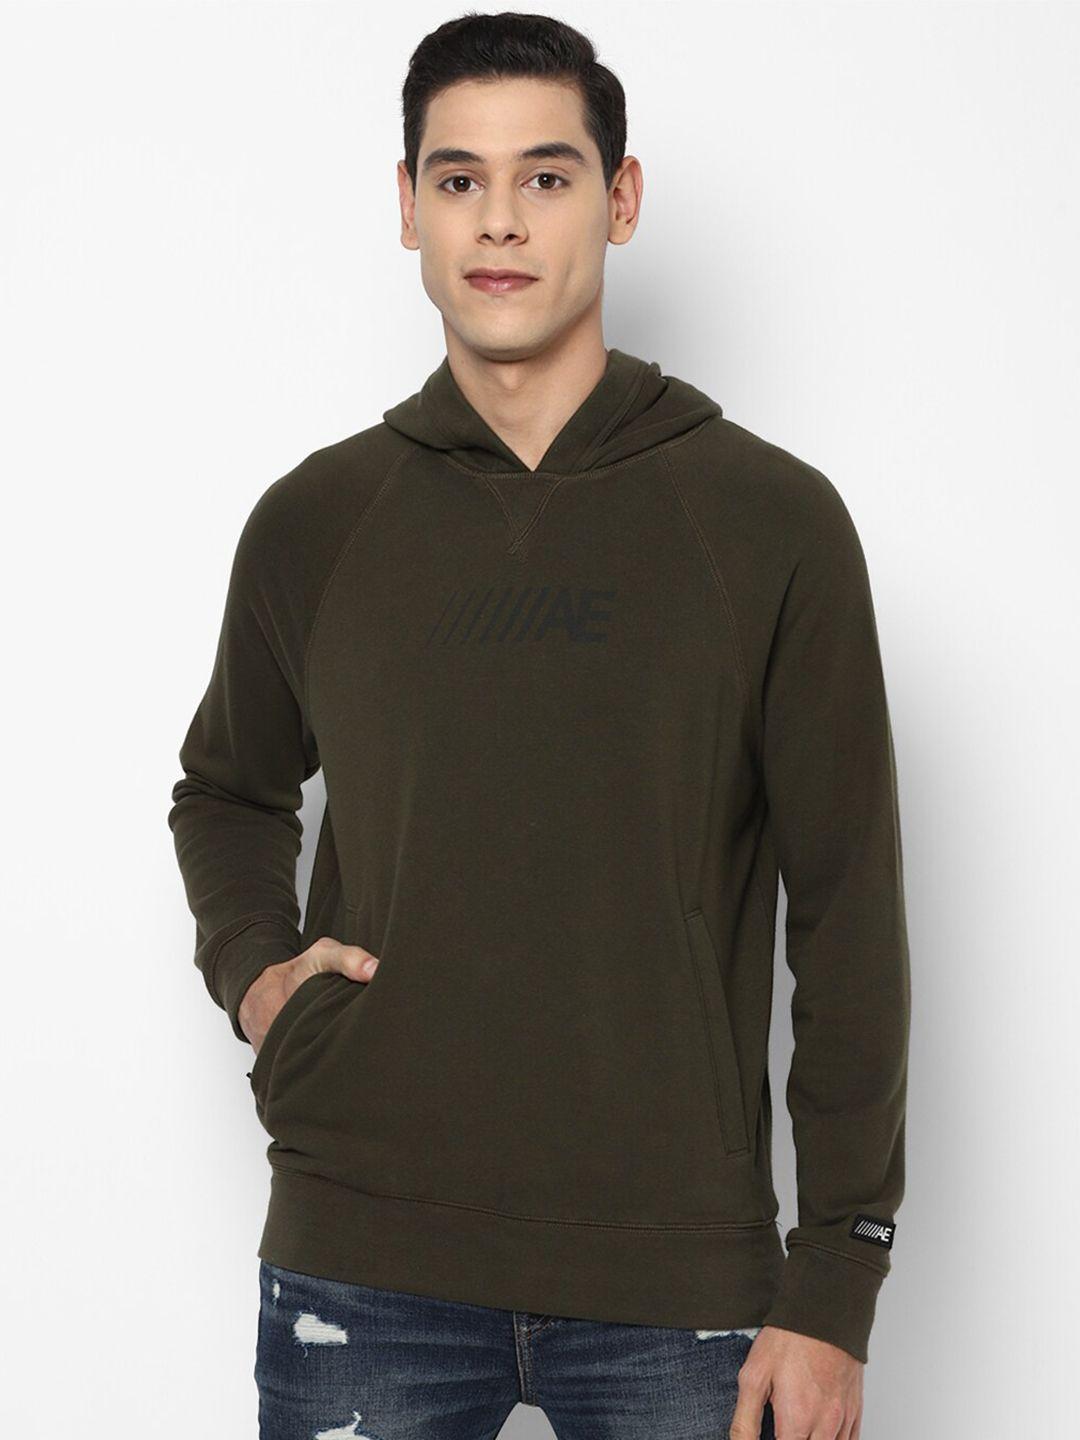 american-eagle-outfitters-men-olive-green-solid-hooded-sweatshirt-with-logo-detail